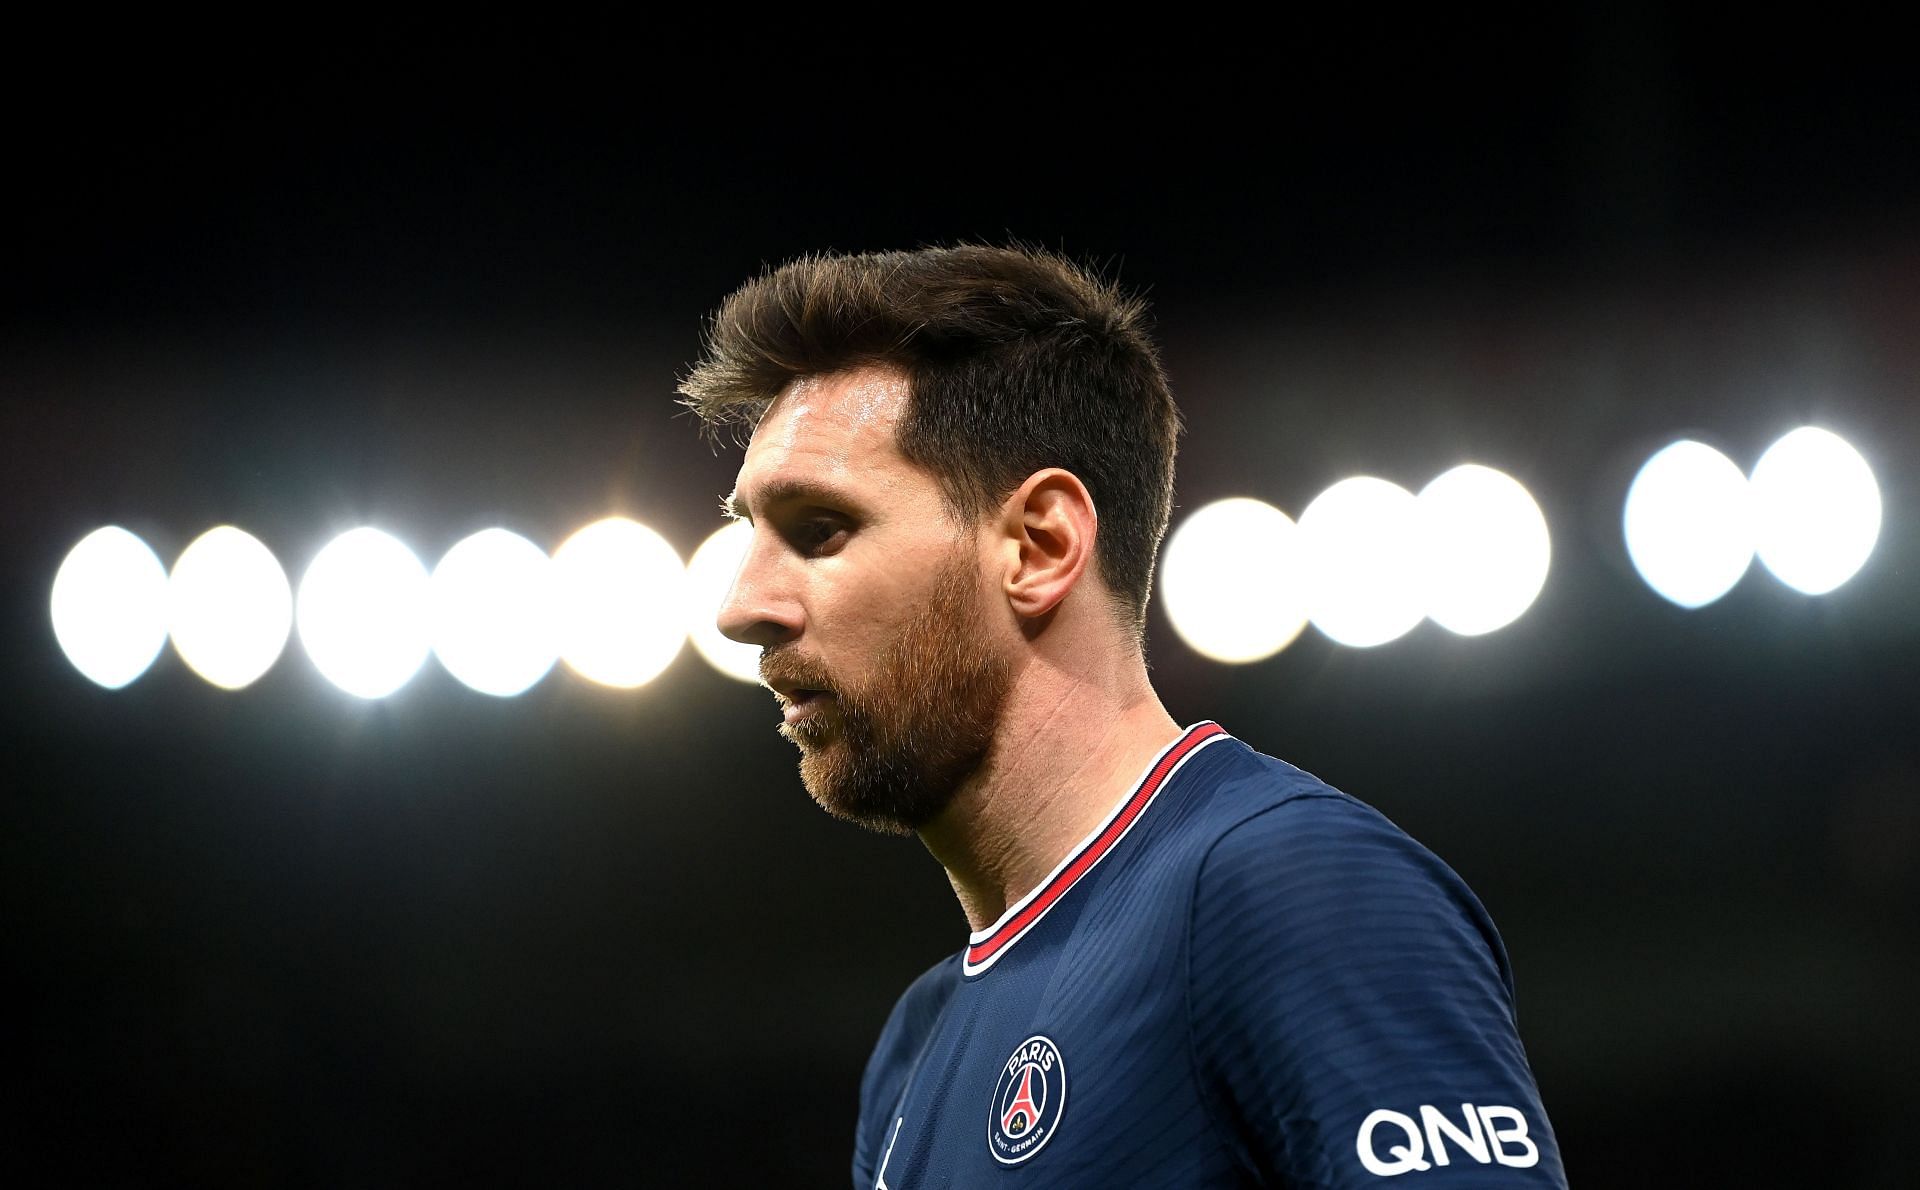 Lionel Messi has named PSG among the favourites to win the Champions League this season.